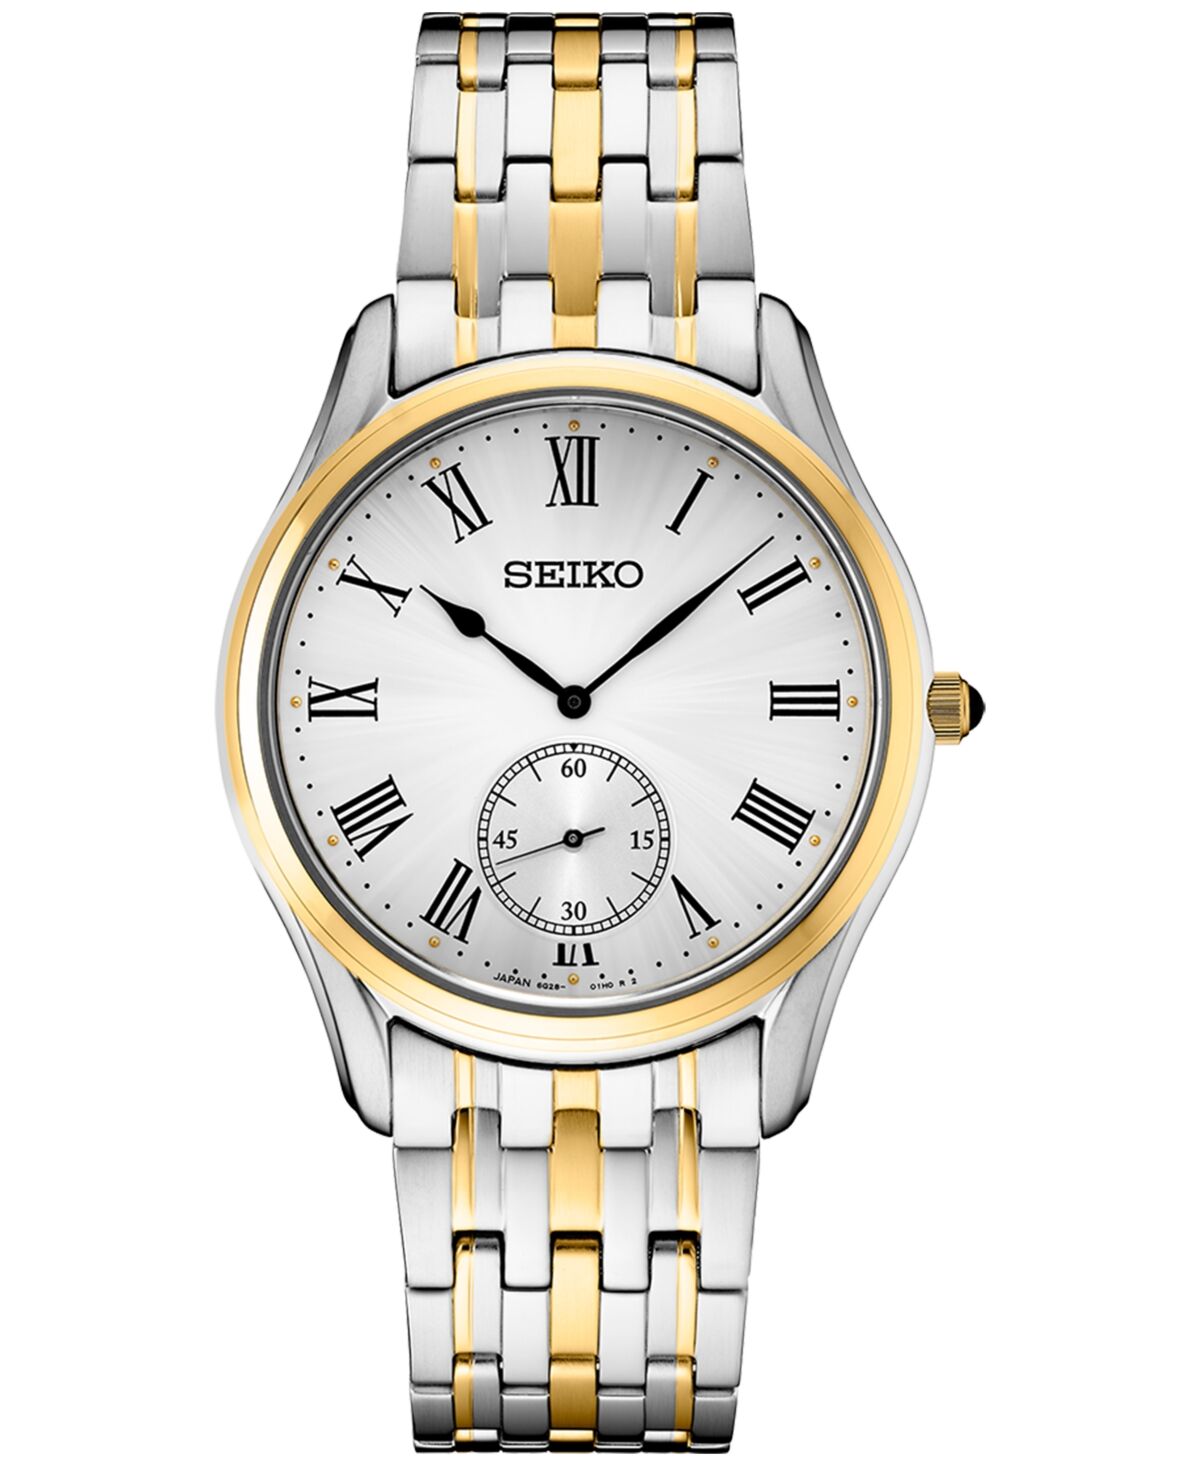 Seiko Men's Analog Essentials Two-Tone Stainless Steel Bracelet Watch 39mm - Silver